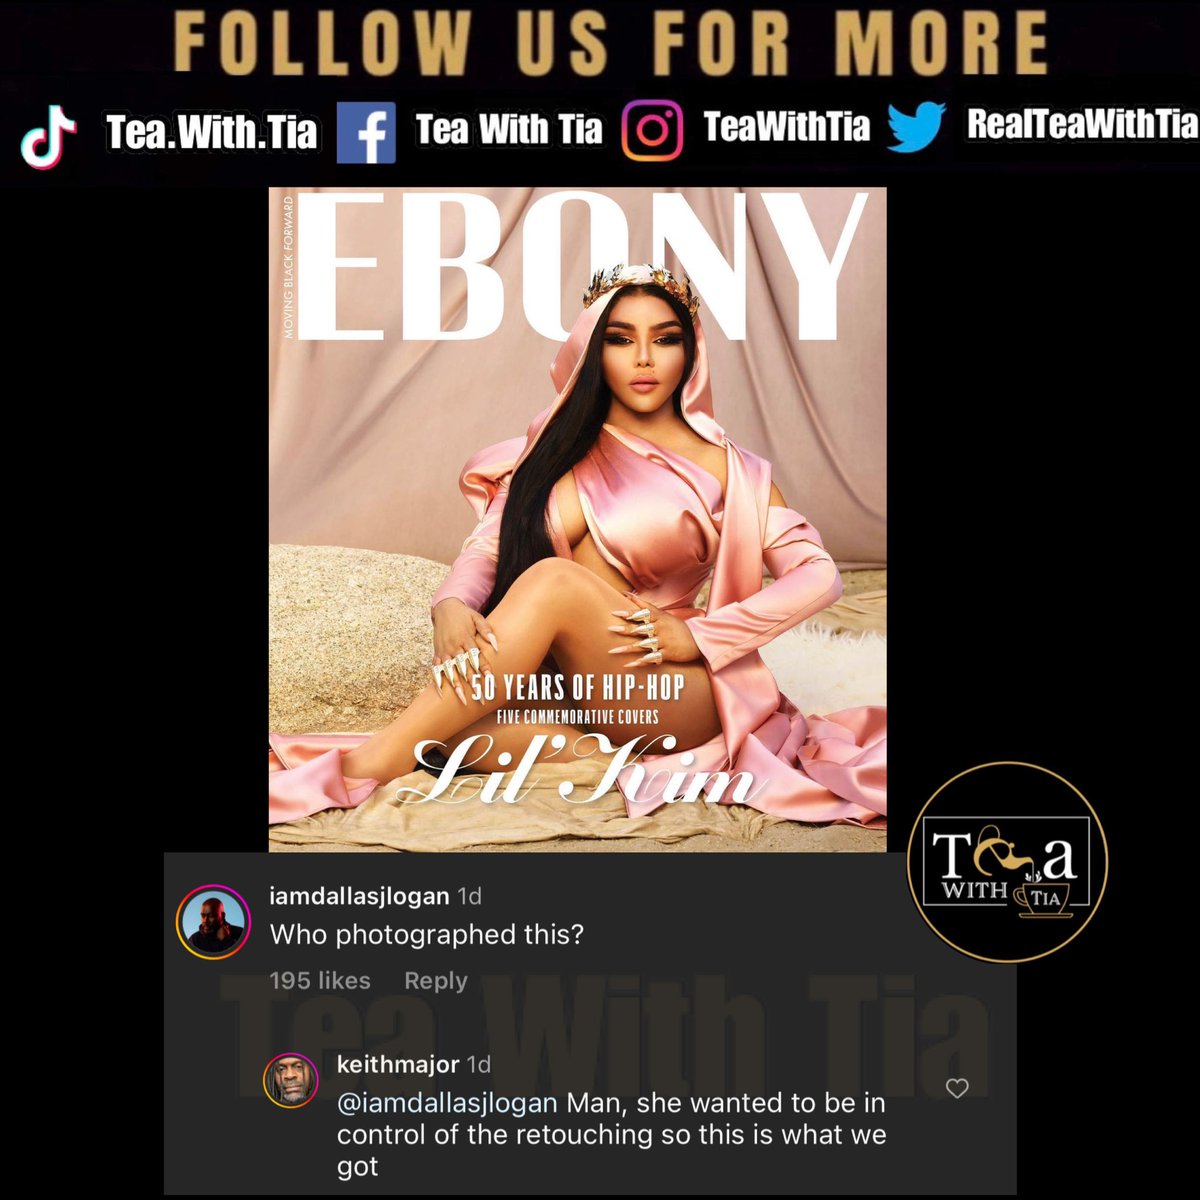 Aht aht, photographer #KeithMajor is letting it be known that he had nothing to do with how the picture of #LilKim came out. 

Lil Kim graced the cover of #EbonyMagazine in celebration of 50 years of Hip Hop. However, fans and critics alike wanted to know who exactly was in the